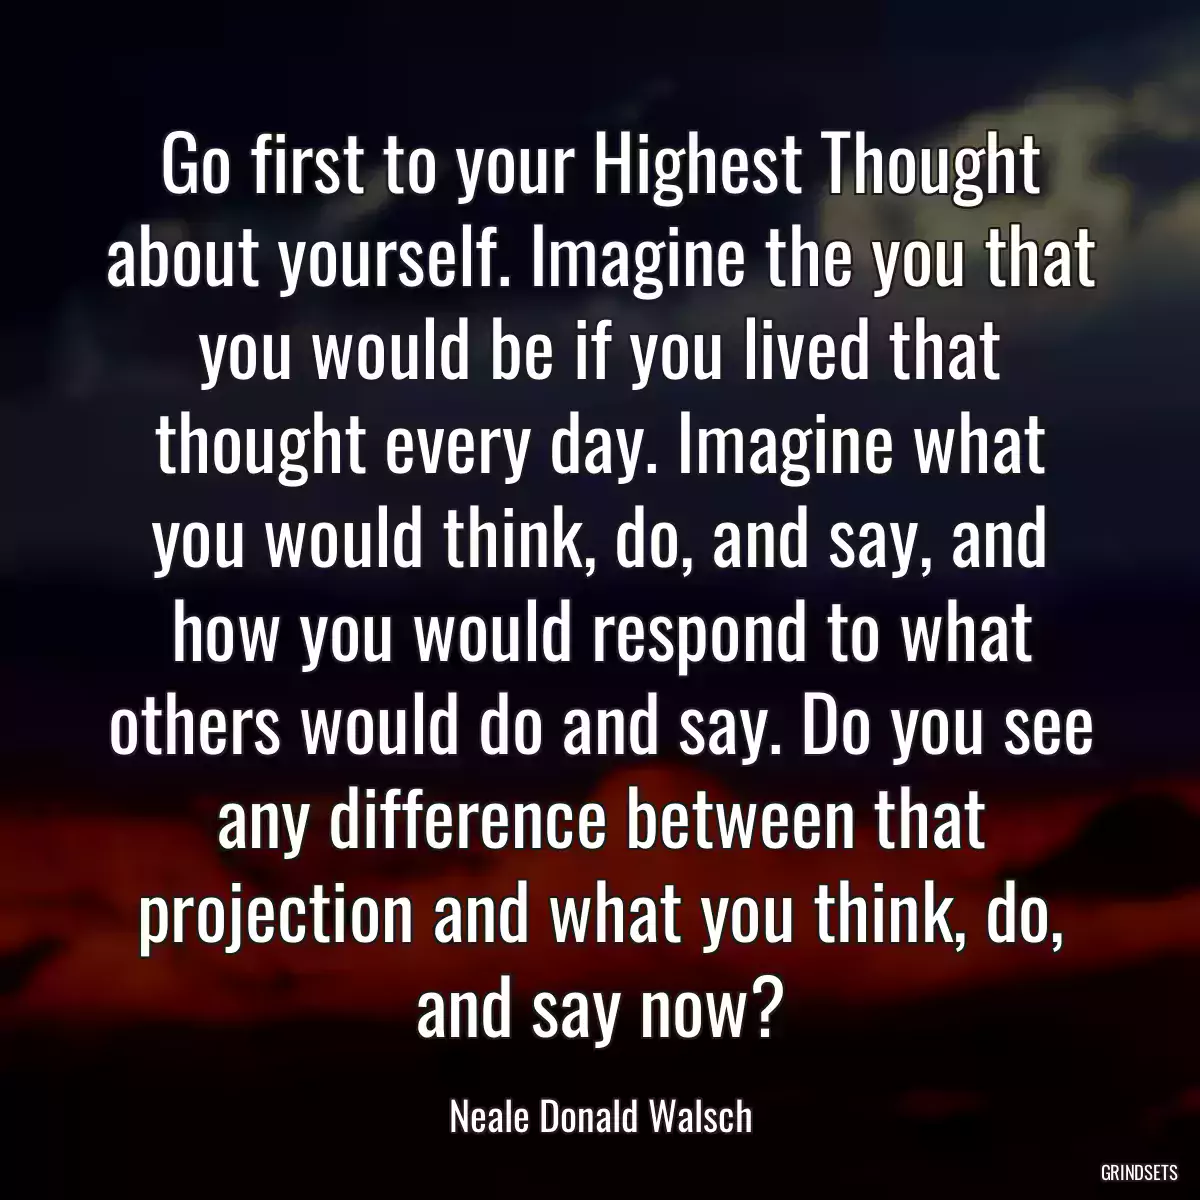 Go first to your Highest Thought about yourself. Imagine the you that you would be if you lived that thought every day. Imagine what you would think, do, and say, and how you would respond to what others would do and say. Do you see any difference between that projection and what you think, do, and say now?